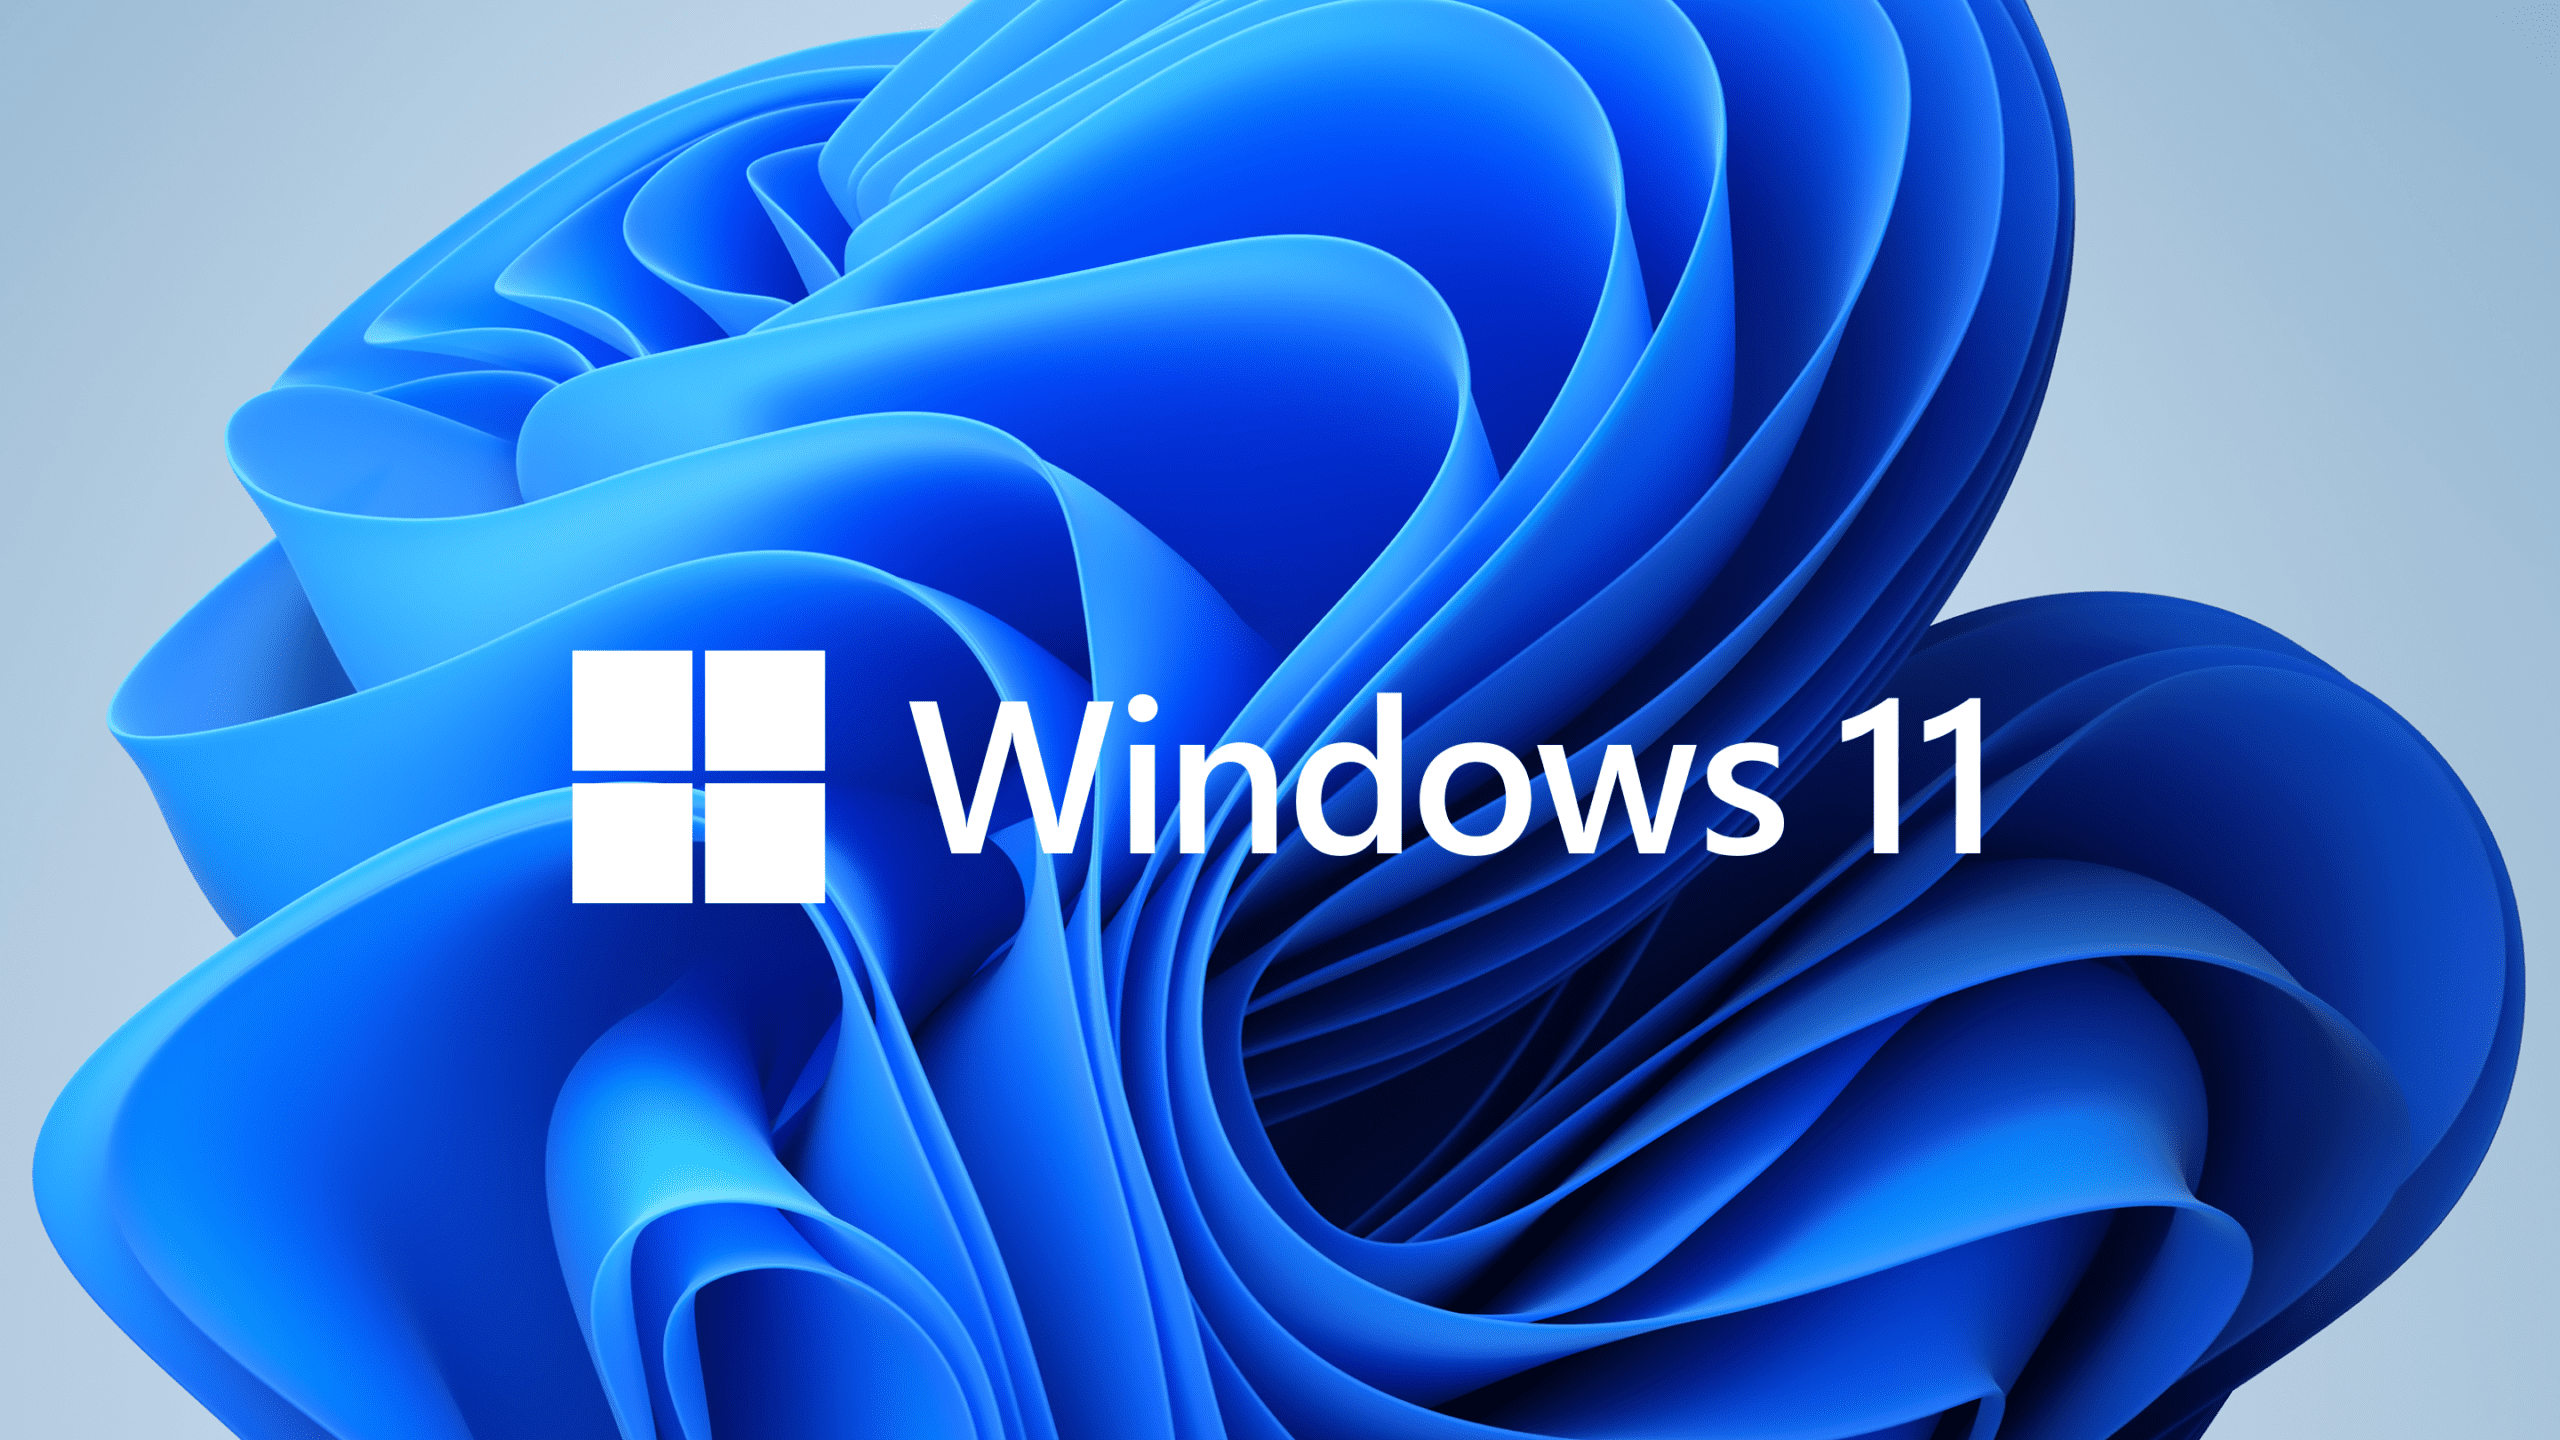 What Are The Features Of Windows 11?